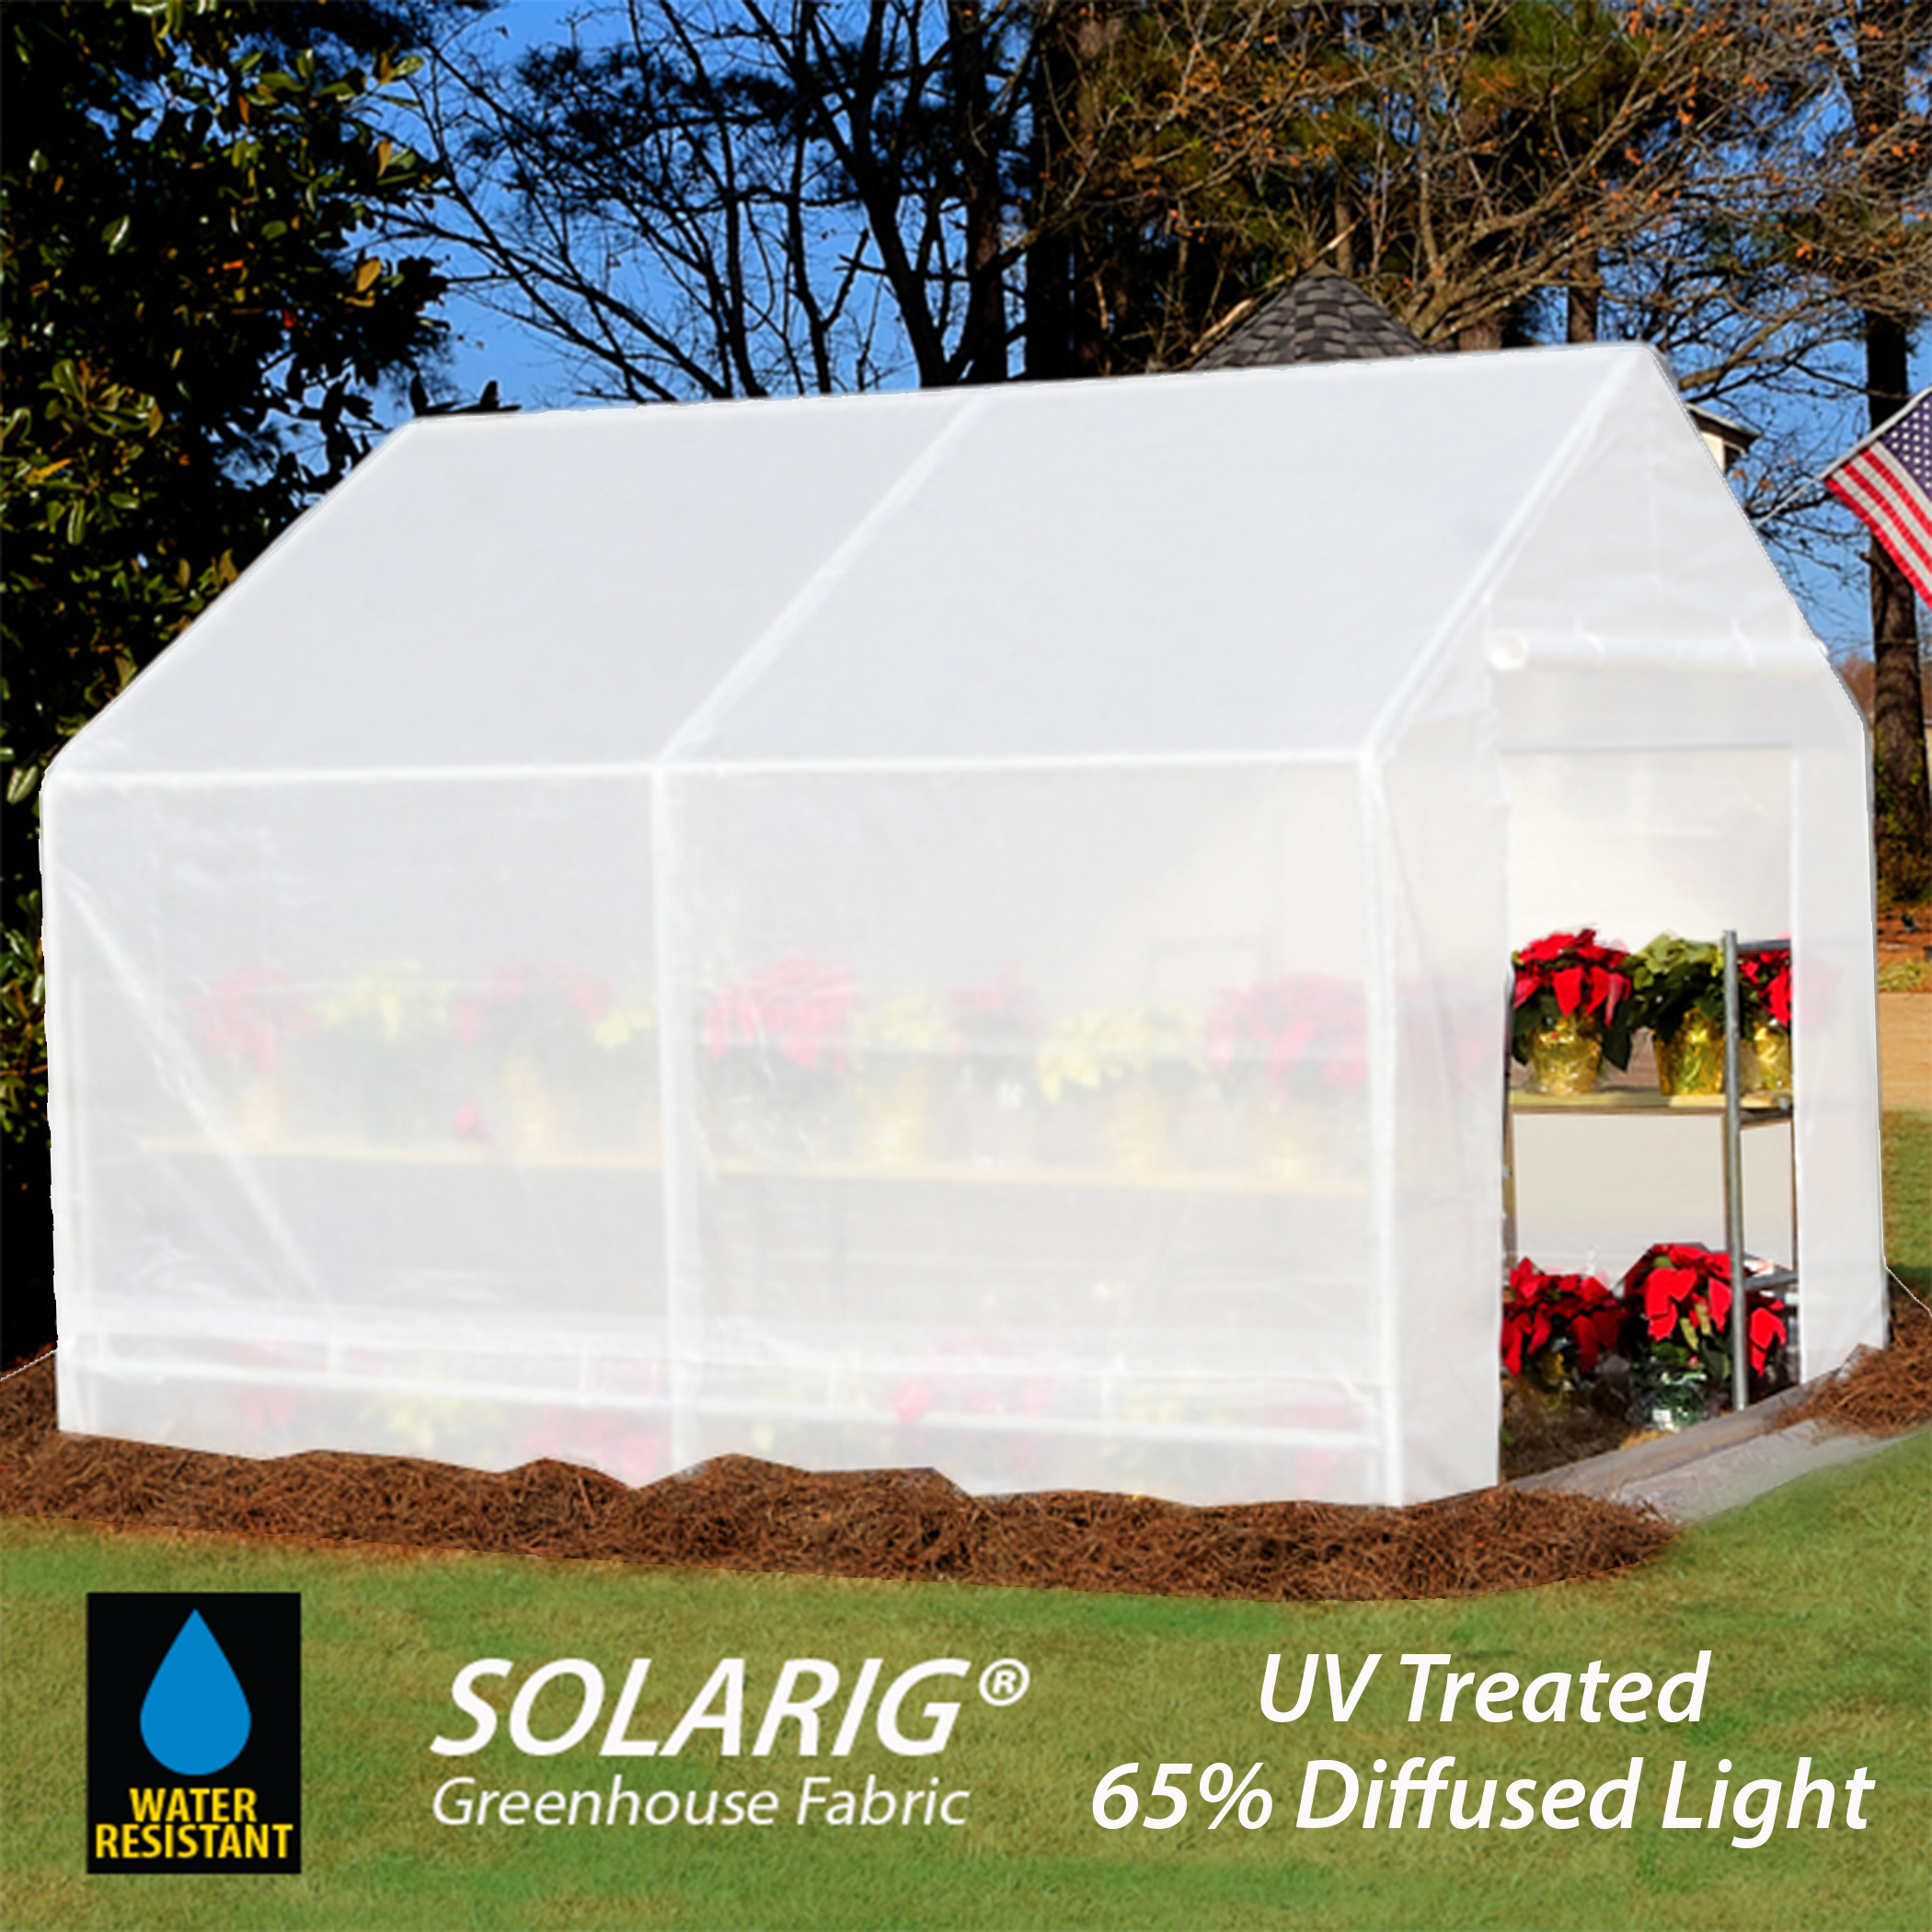 King Canopy Greenhouse 10' x 10' , 1 3/8 in. Steel Frame, 6-LEG, Opaque - image 4 of 7